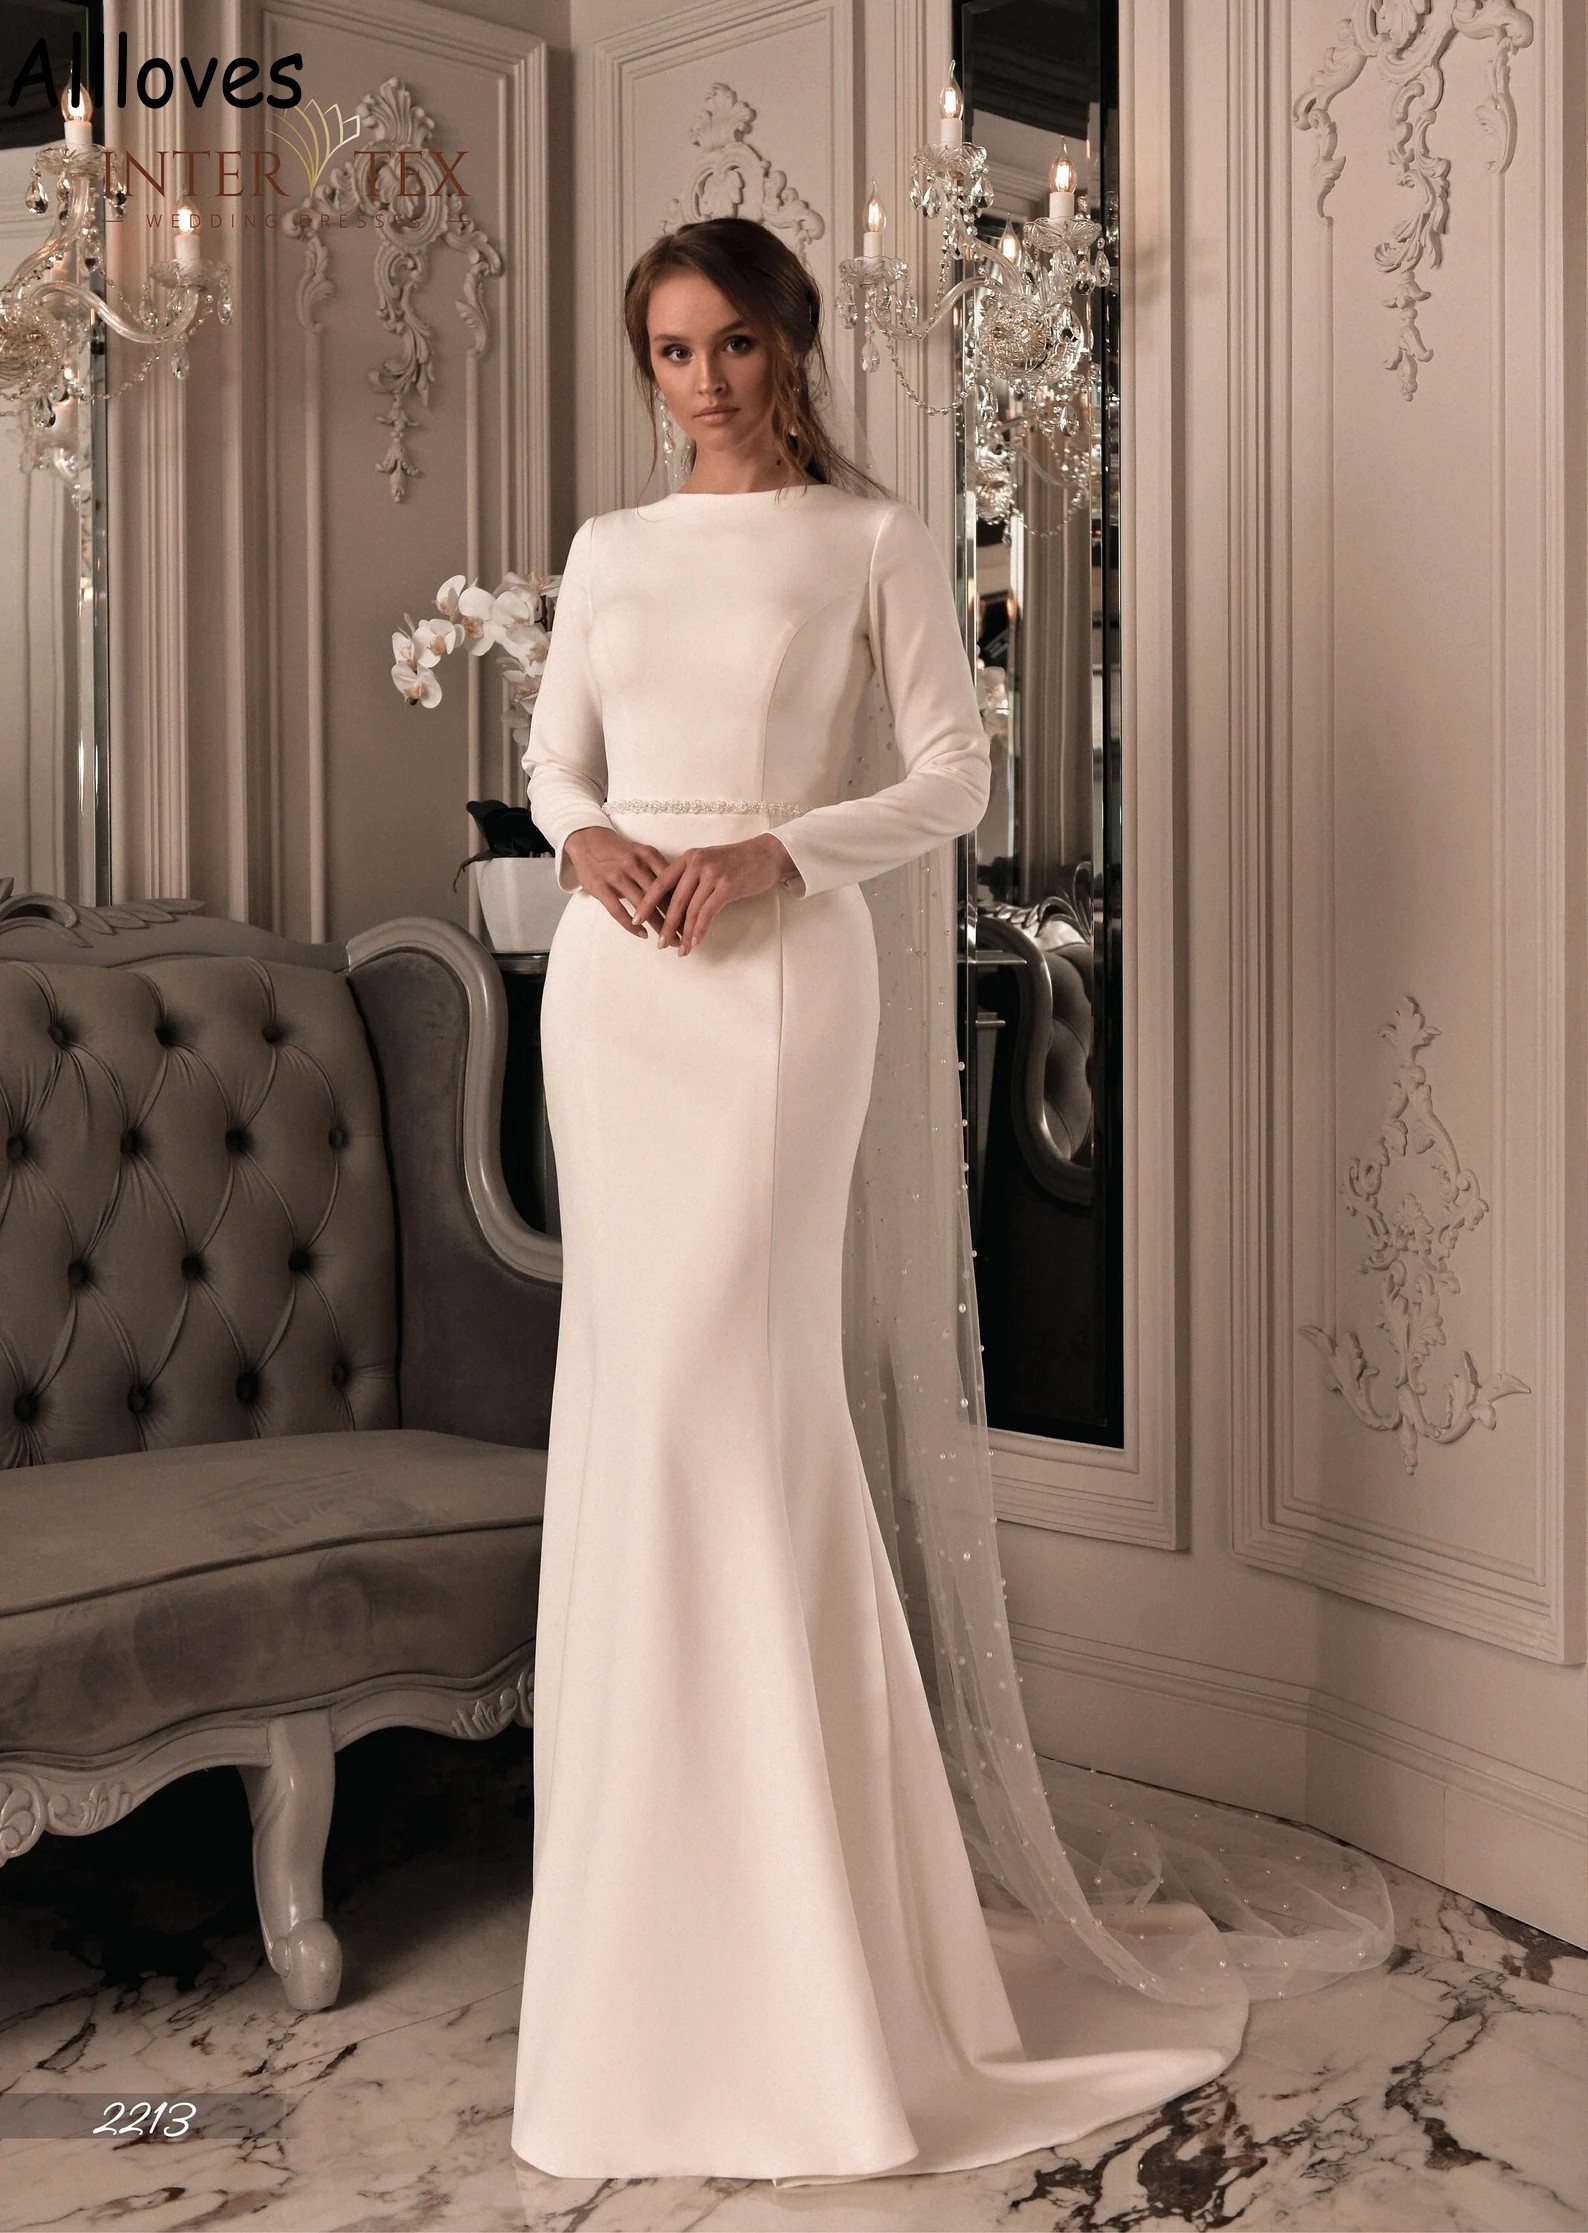 Modest Satin Mermaid Wedding Dresses With Long Sleeves Jewel Neck Simple Garden Bridal Gowns Crystals Belt Sweep Train Sexy Open Back Fashion Robes de Mariee CL1667